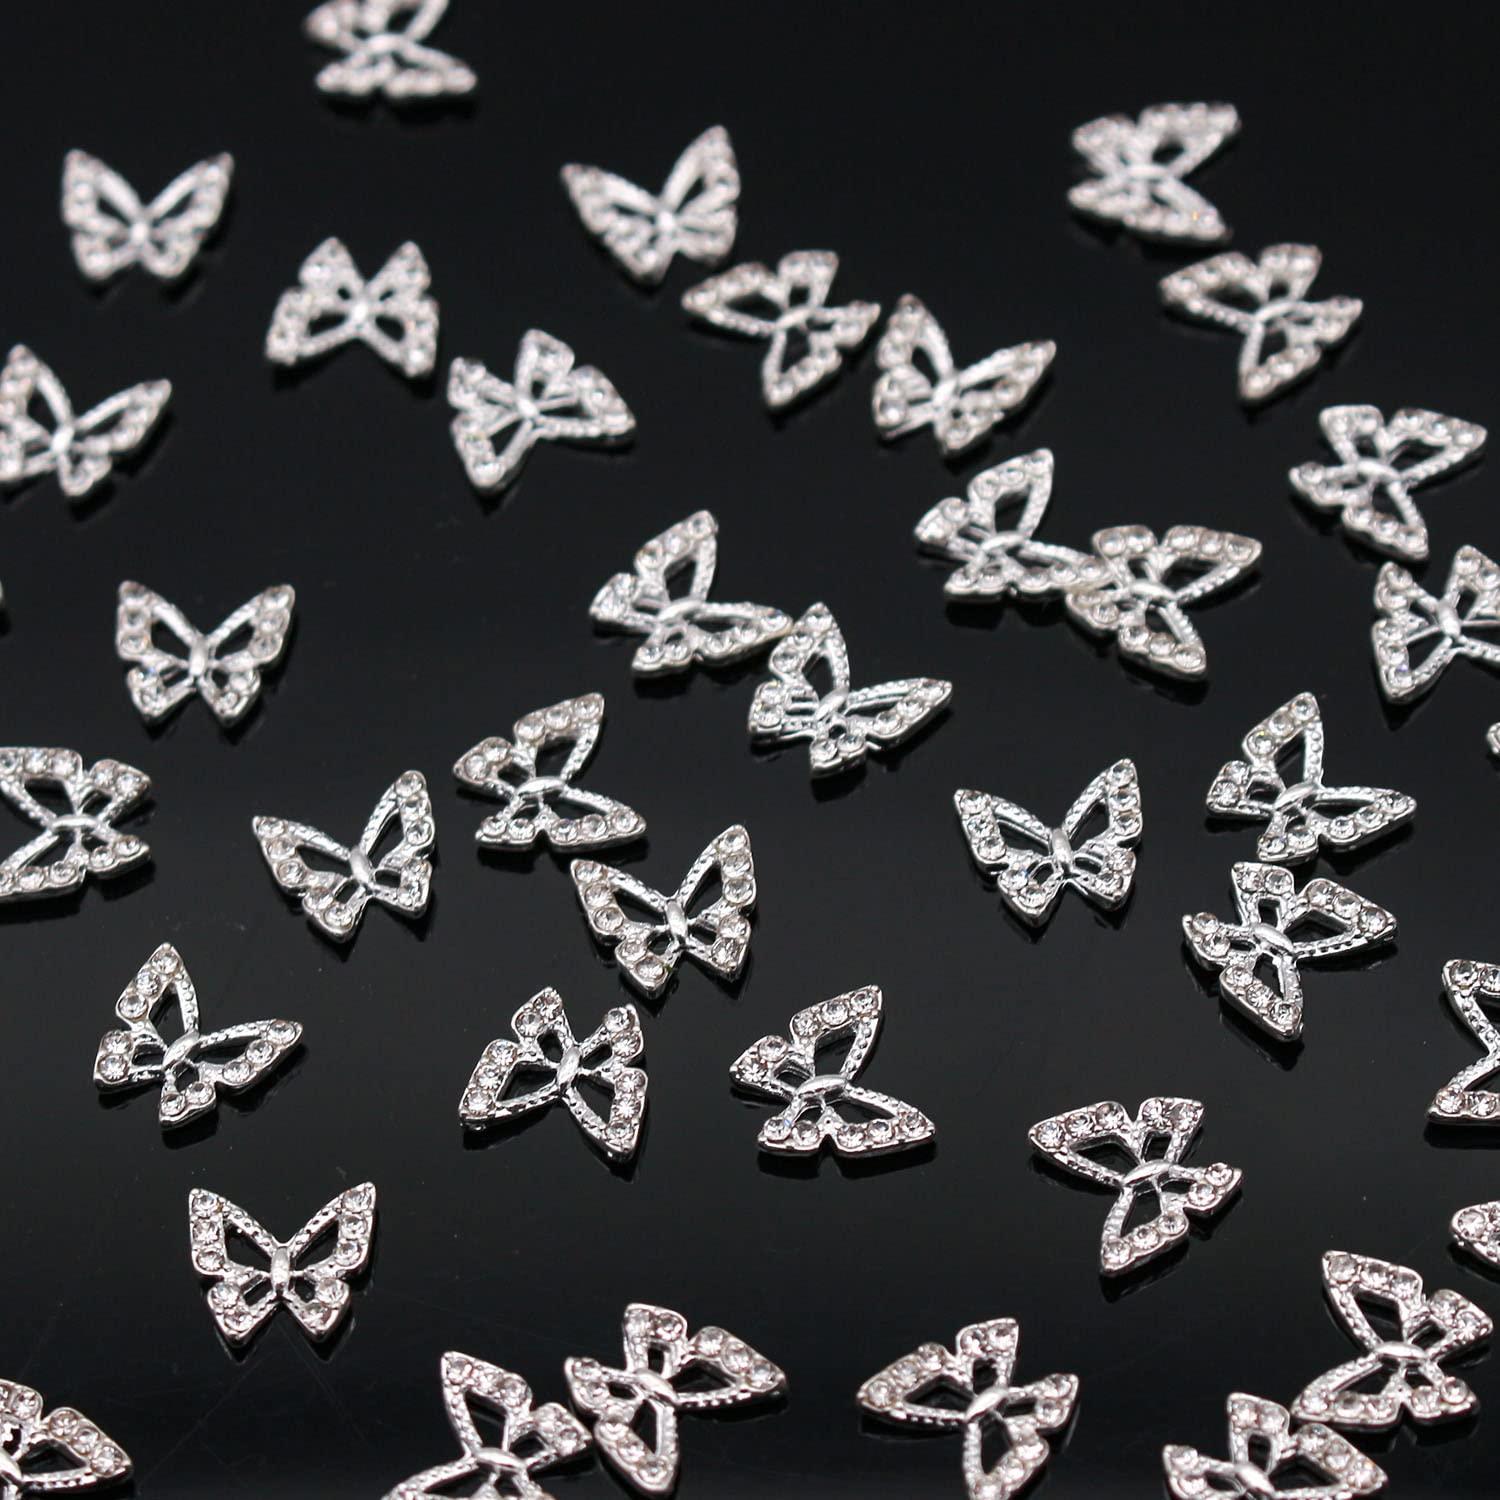 JERCLITY 30 Pieces 3D Gold and Silver Butterfly Nail Charms Inlaid